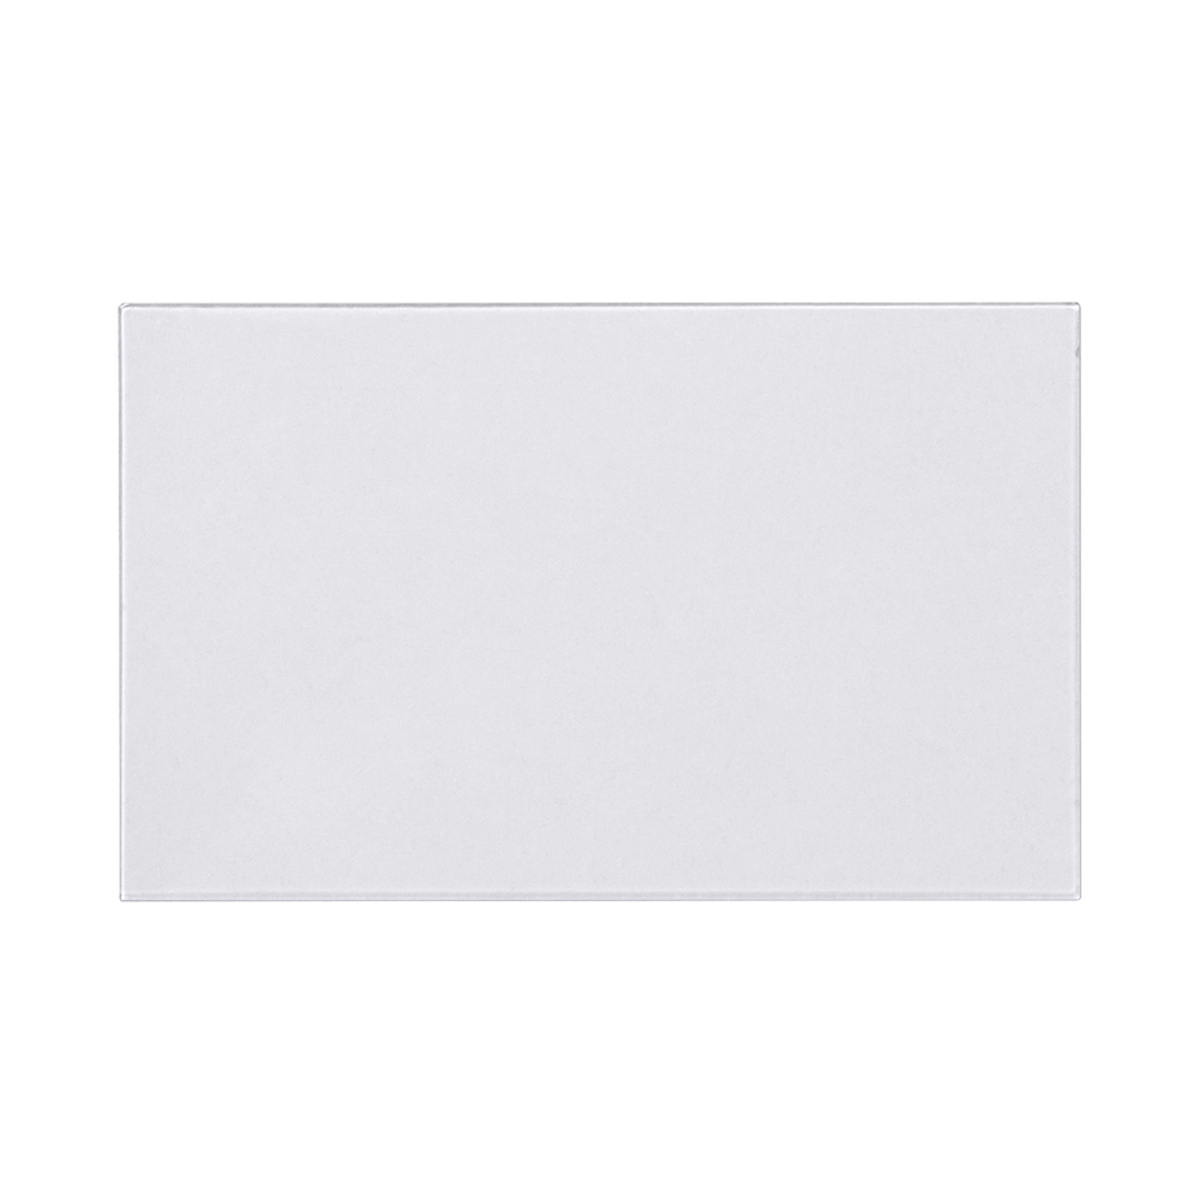 Jackson Safety® Insight Clear Polycarbonate Inside Cover Plate